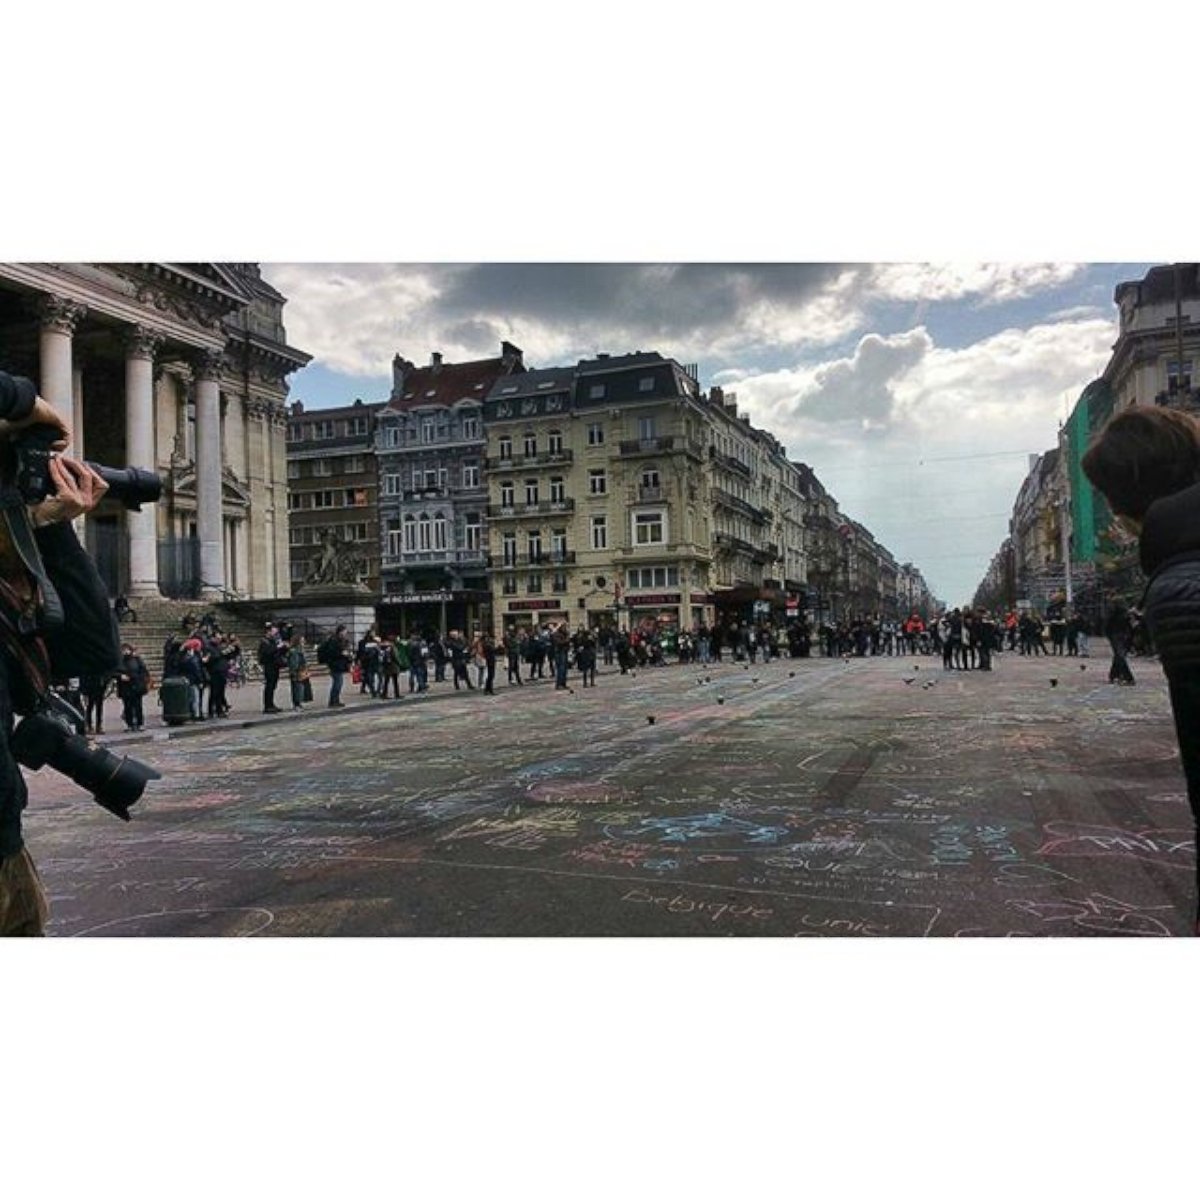 PHOTO: Joey Leslie posted a photo on Instagram with the message: "Magnificent people in a vibrant, resilient city.  Honored to be here.  #WEAREBRUSSELS"